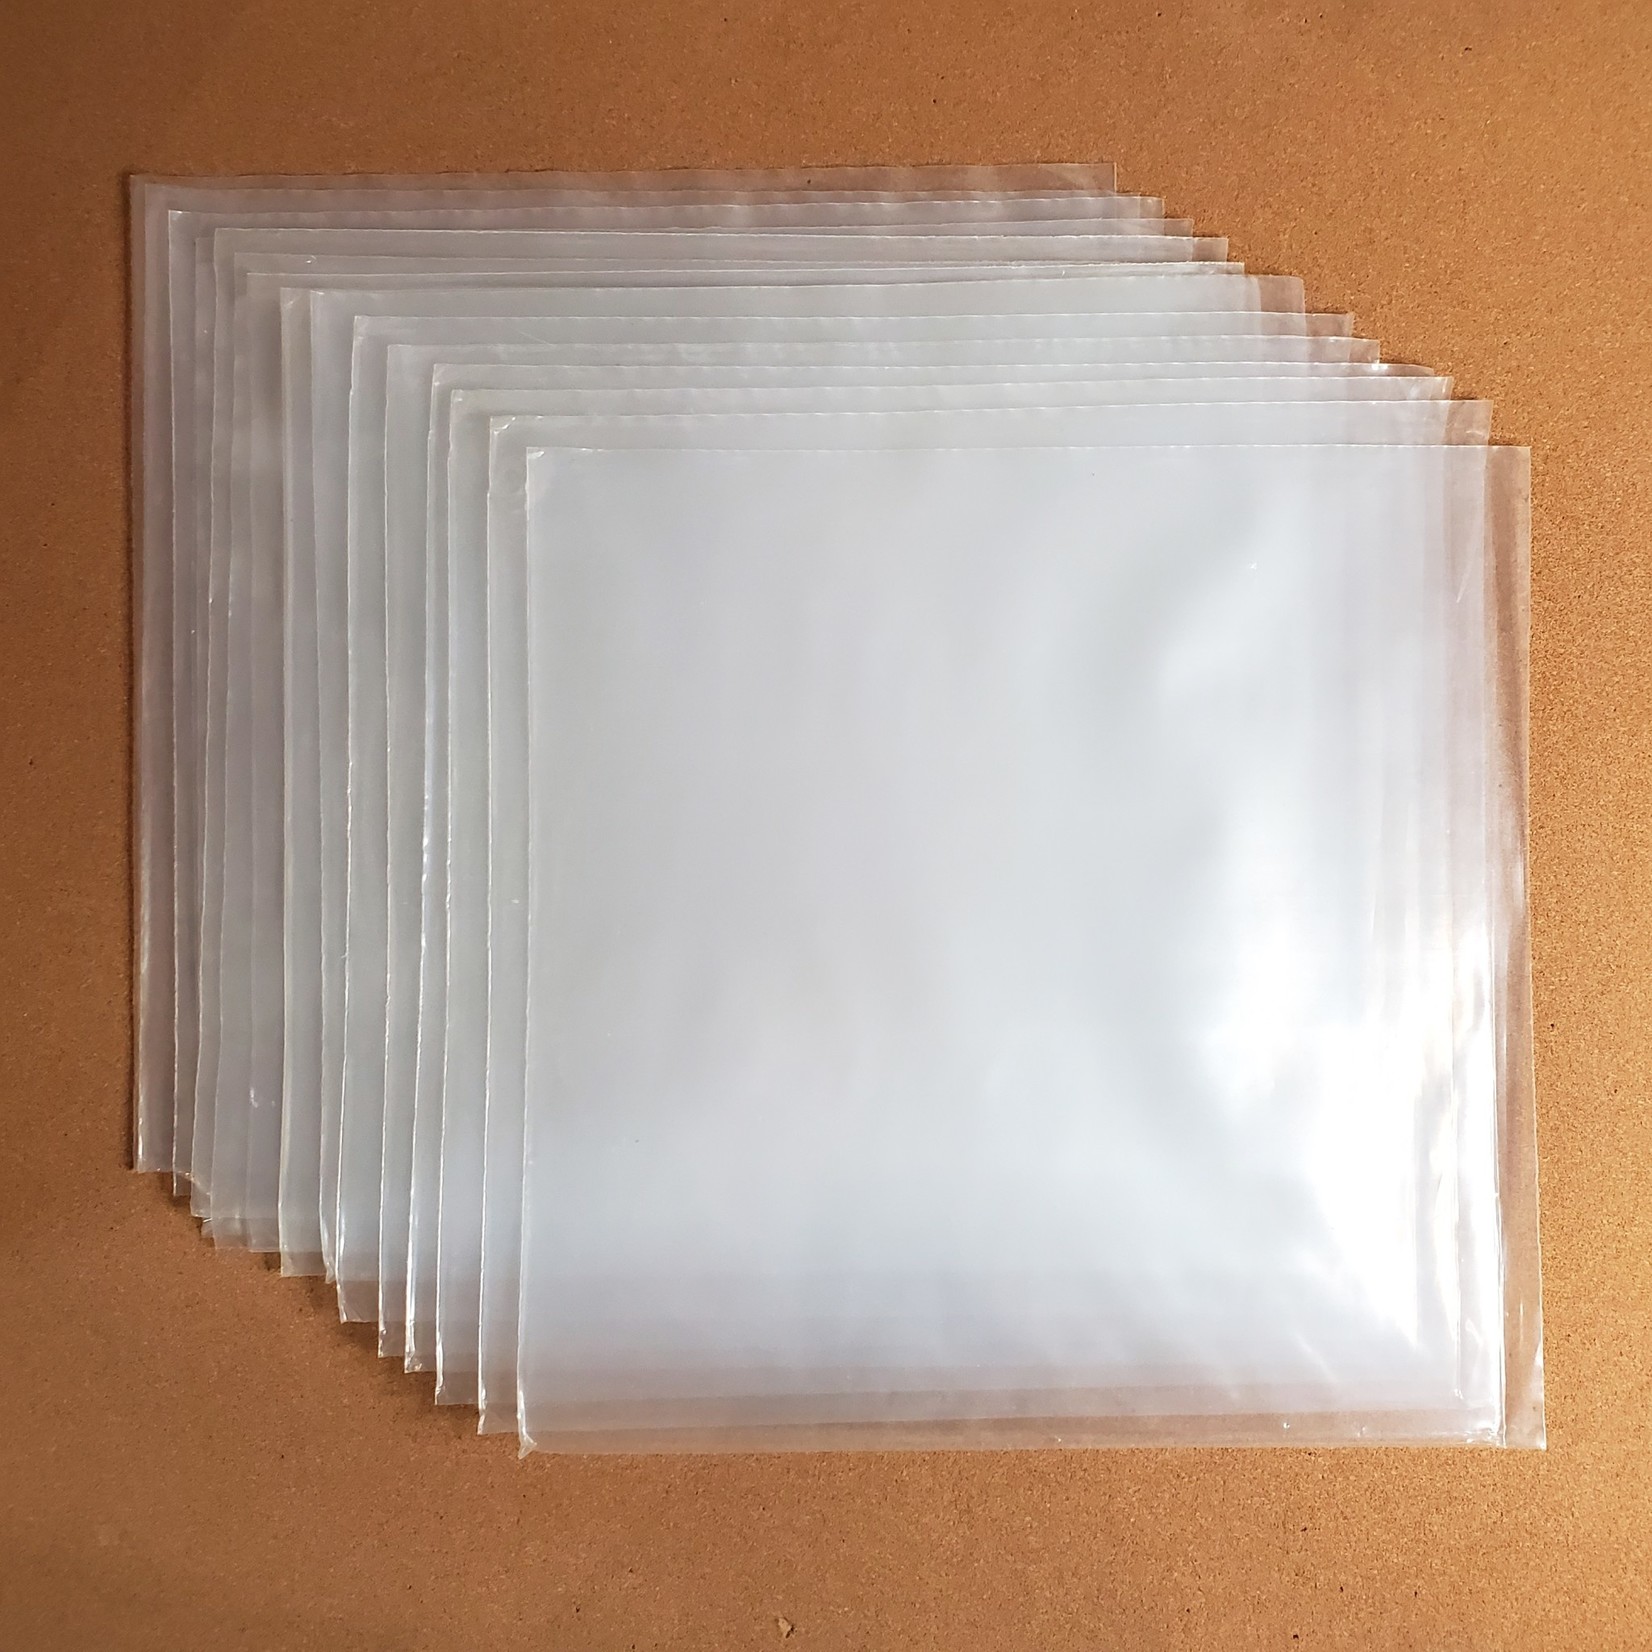 [Accessories] 12'' - Plastic Outer Sleeves (100pk)